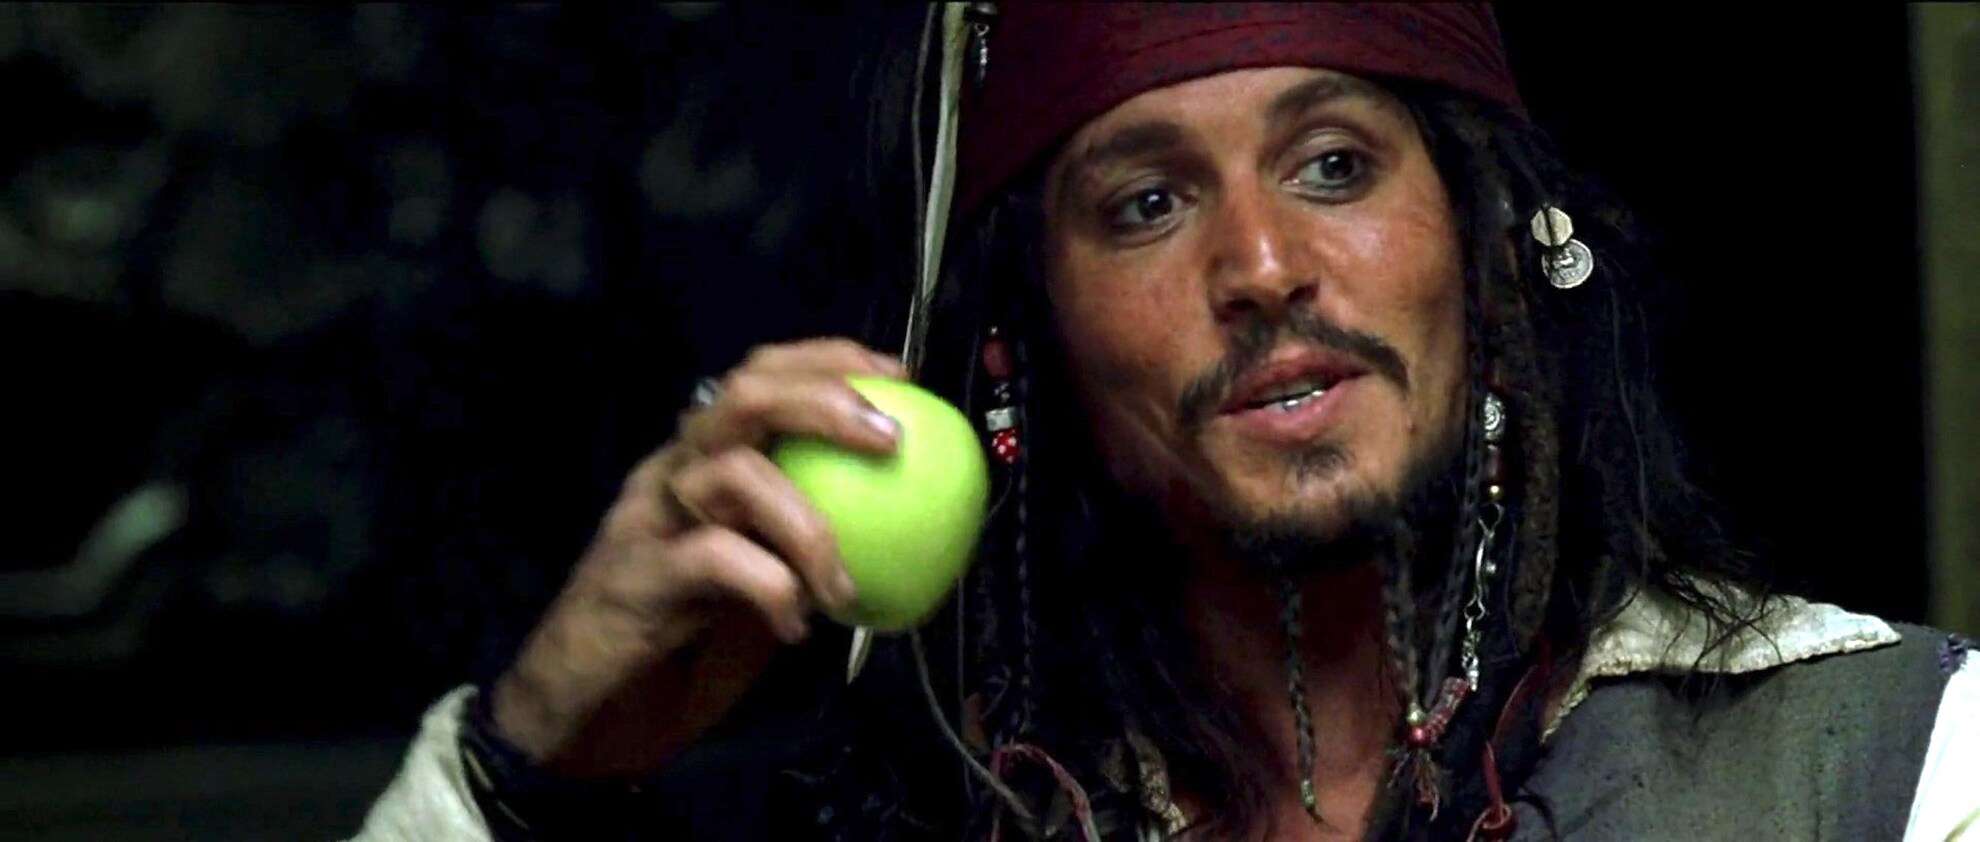 Johnny Depp eats an apple in this image from Walt Disney Pictures.